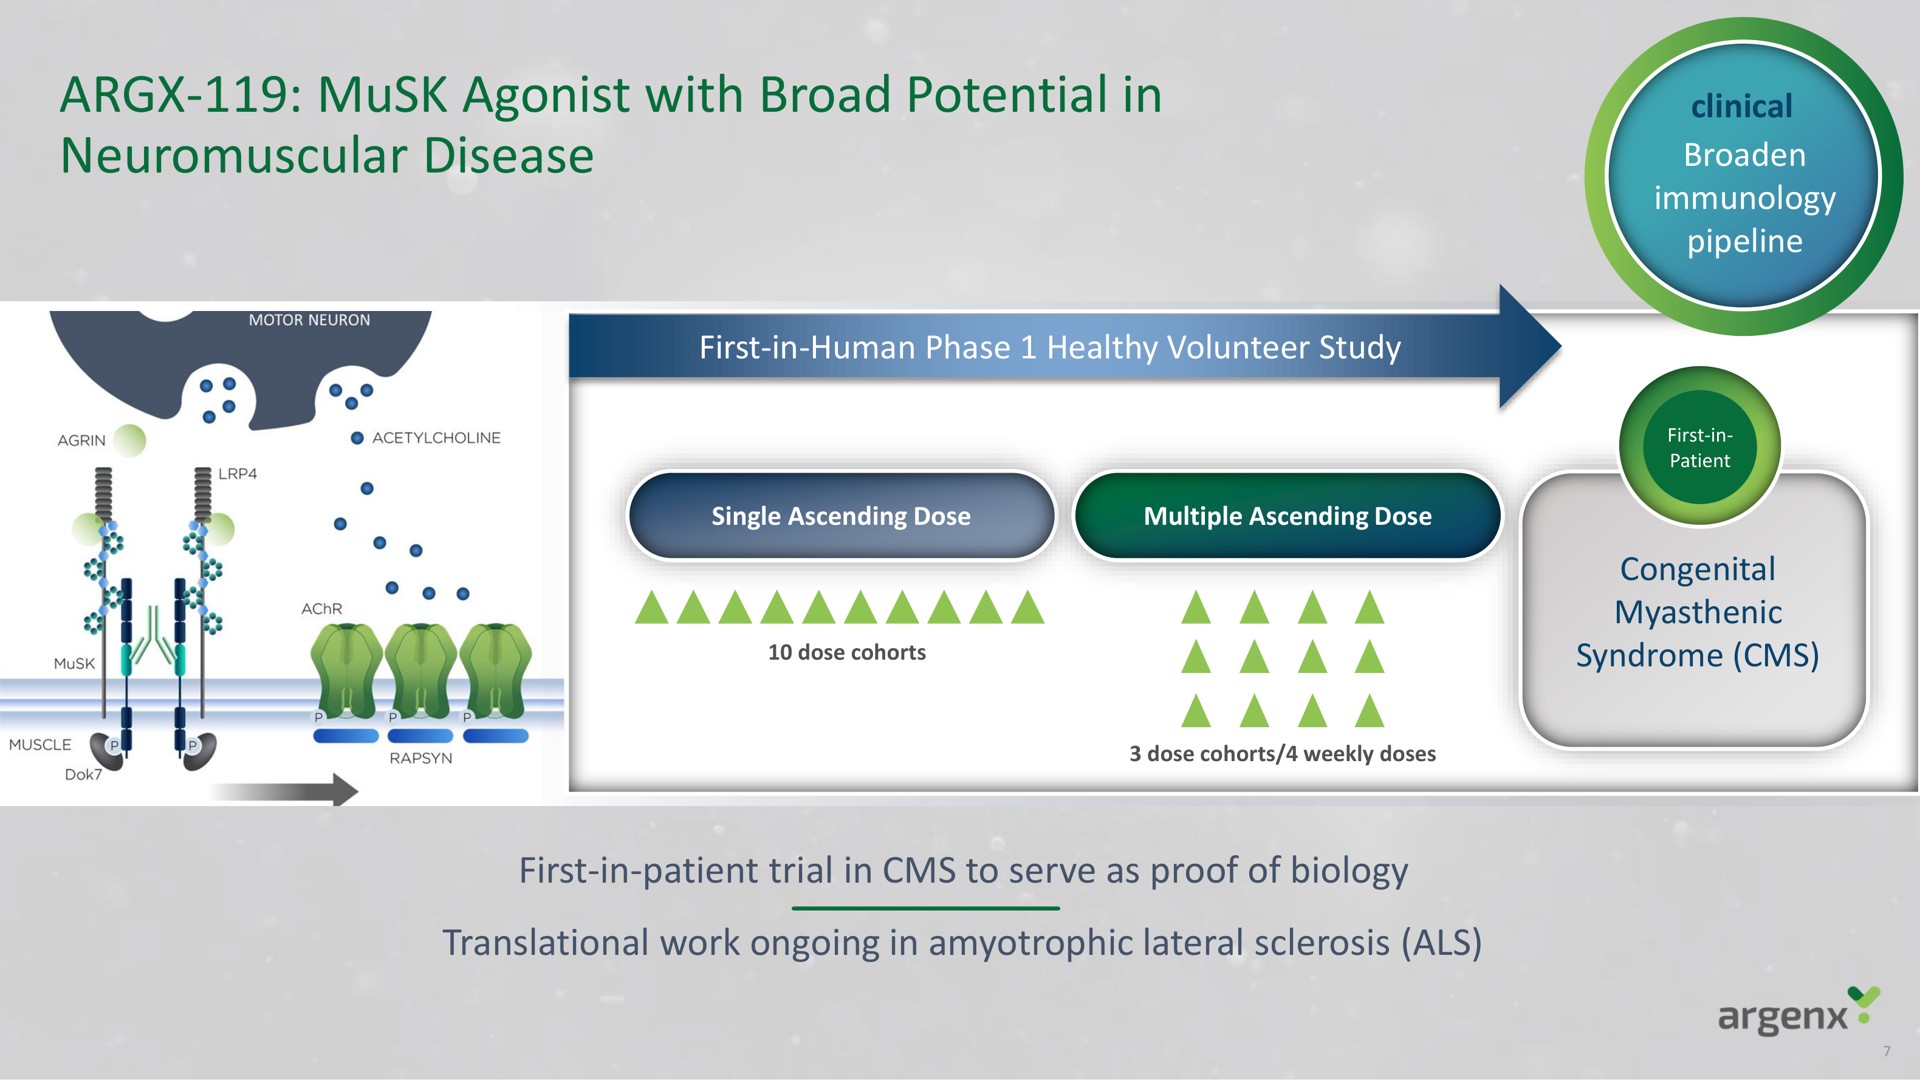 musk agonist with broad potential in neuromuscular disease | argenx SE